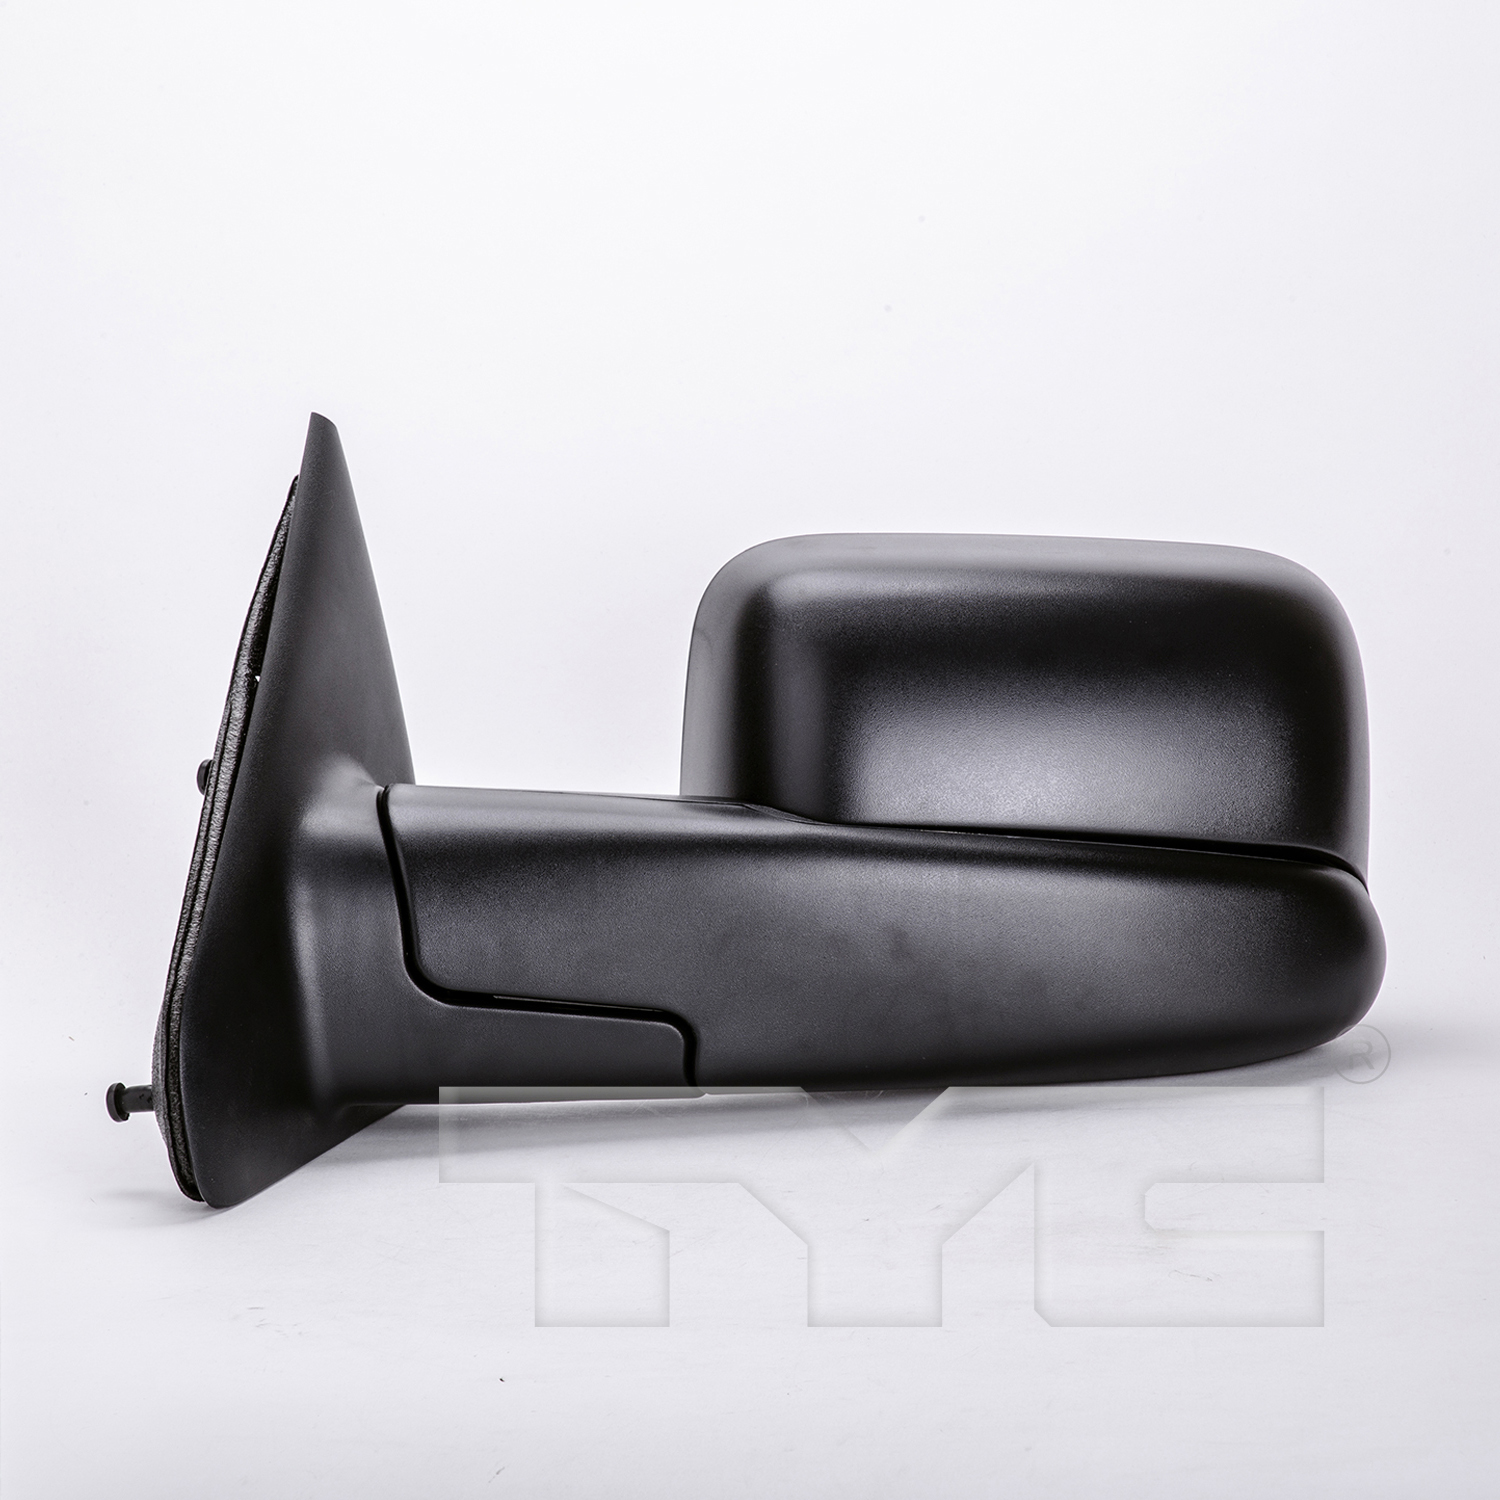 Aftermarket MIRRORS for DODGE - RAM 2500, RAM 2500,05-09,LT Mirror outside rear view